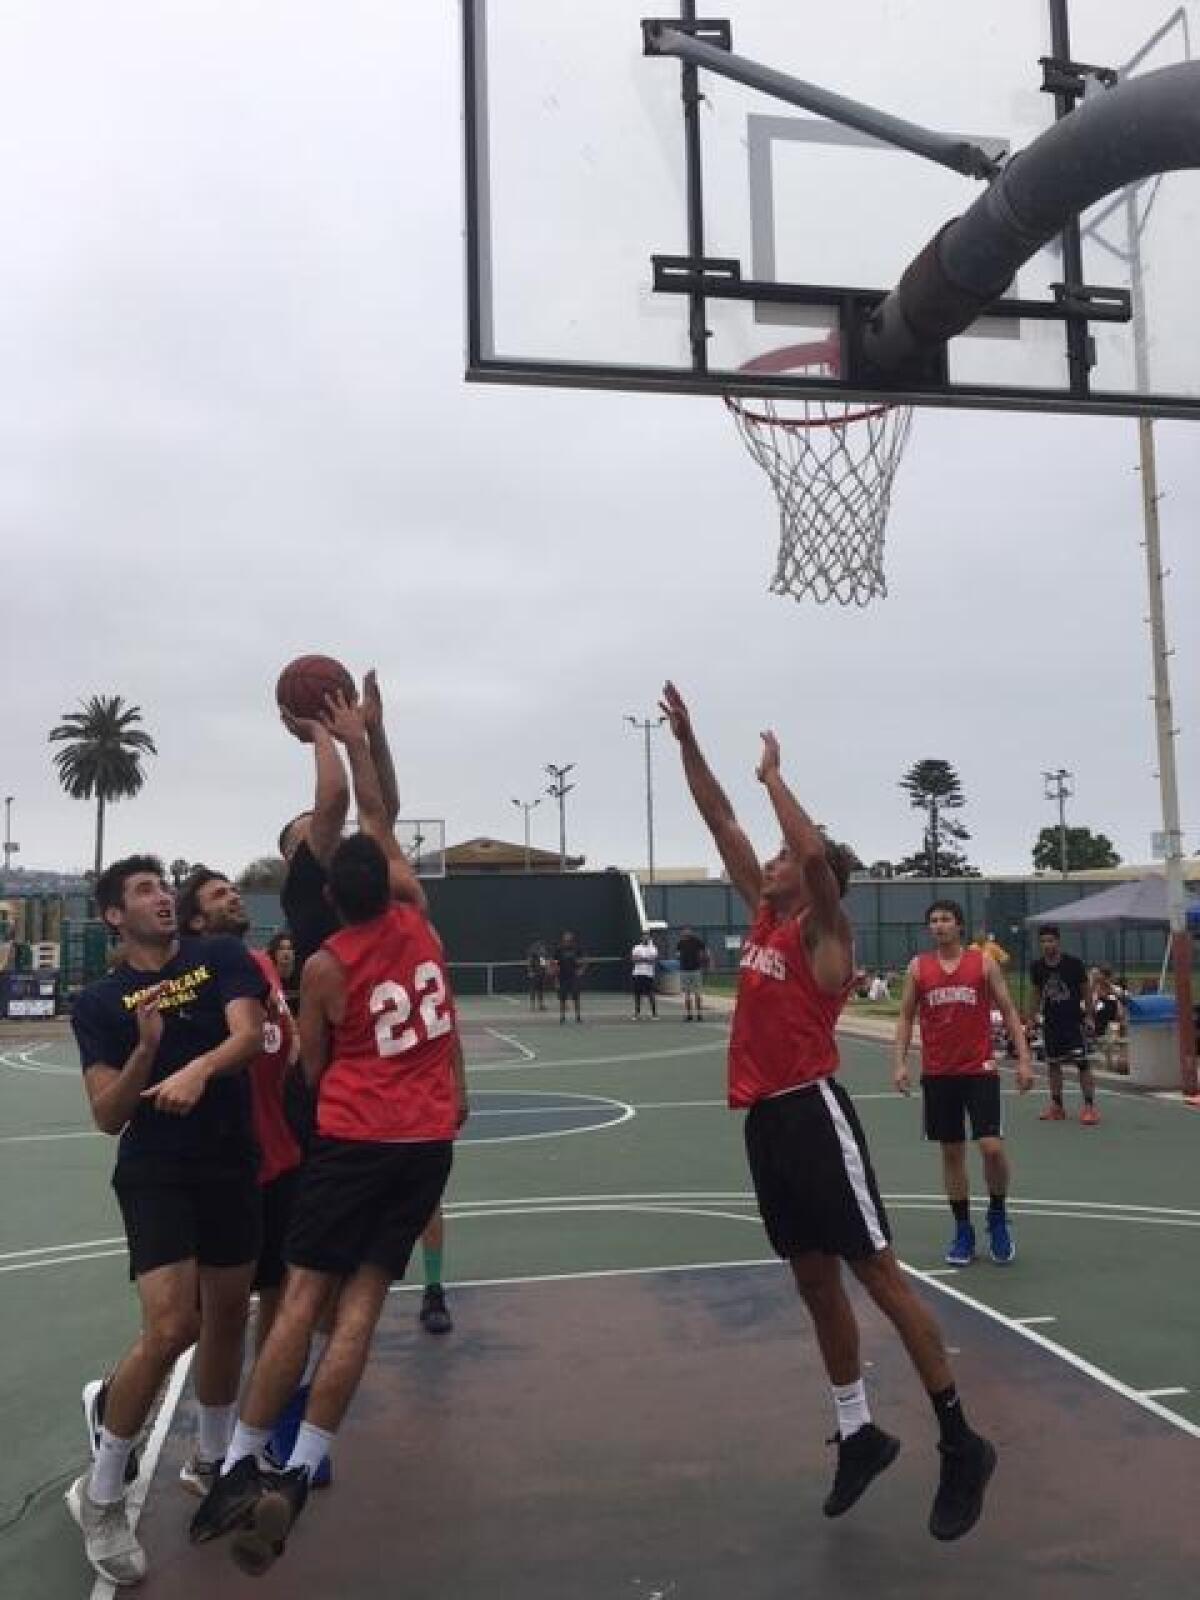 Action on the court during the second annual Sneaks Summer Classic basketball tournament held July 6, 2019 at La Jolla Recreation Center